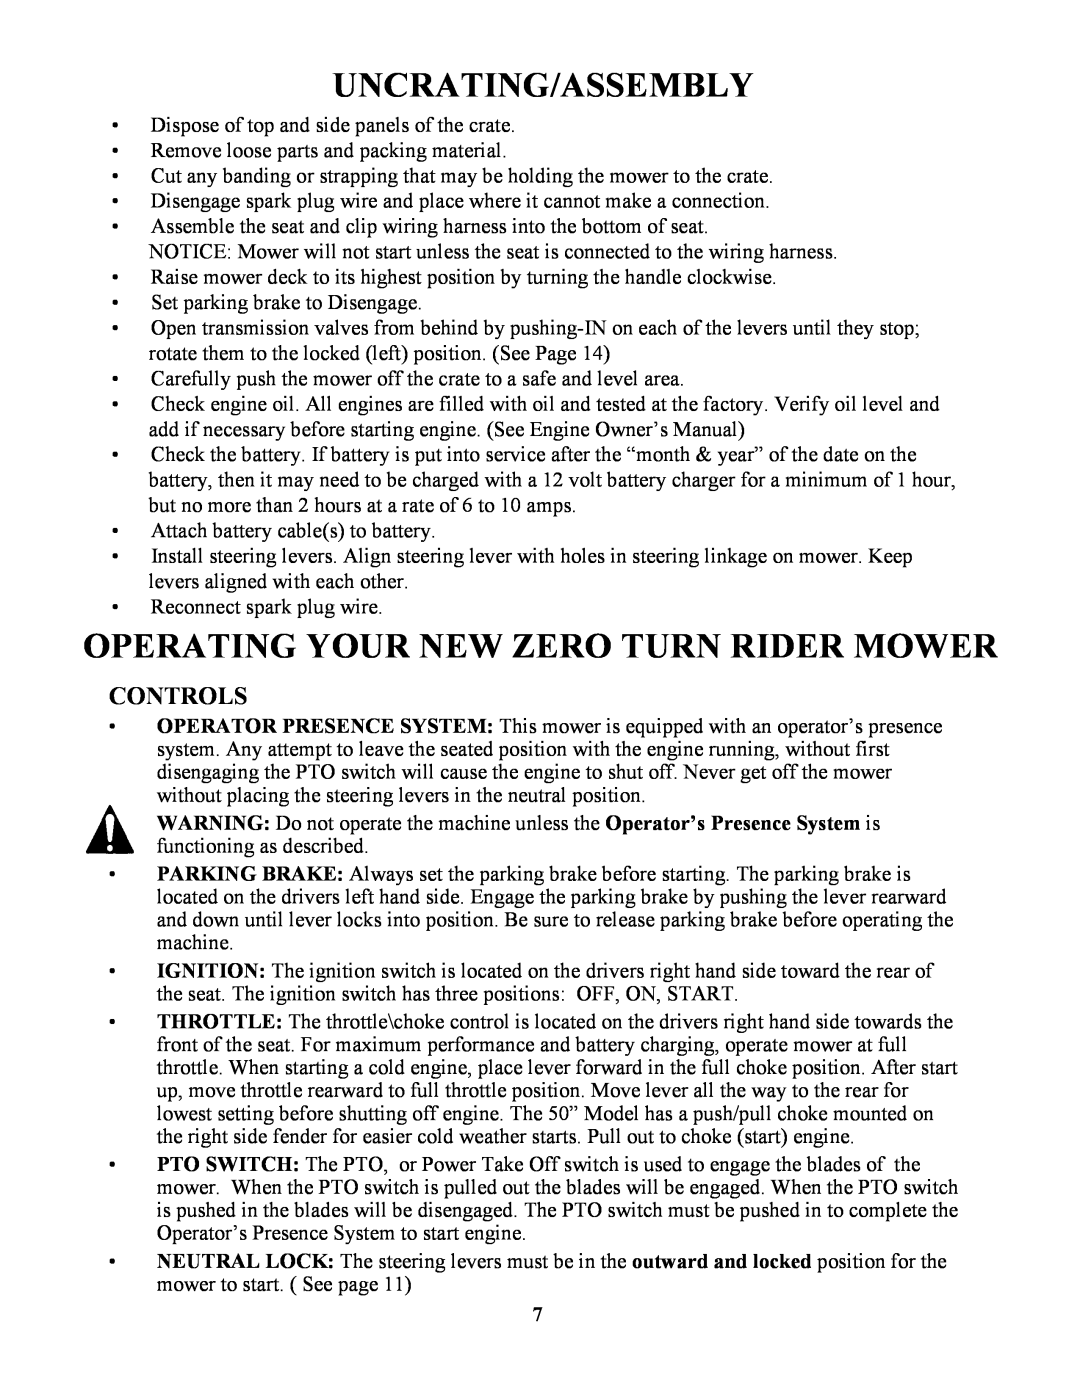 Swisher ZT2350 owner manual Uncrating/Assembly, Operating Your New Zero Turn Rider Mower, Controls 